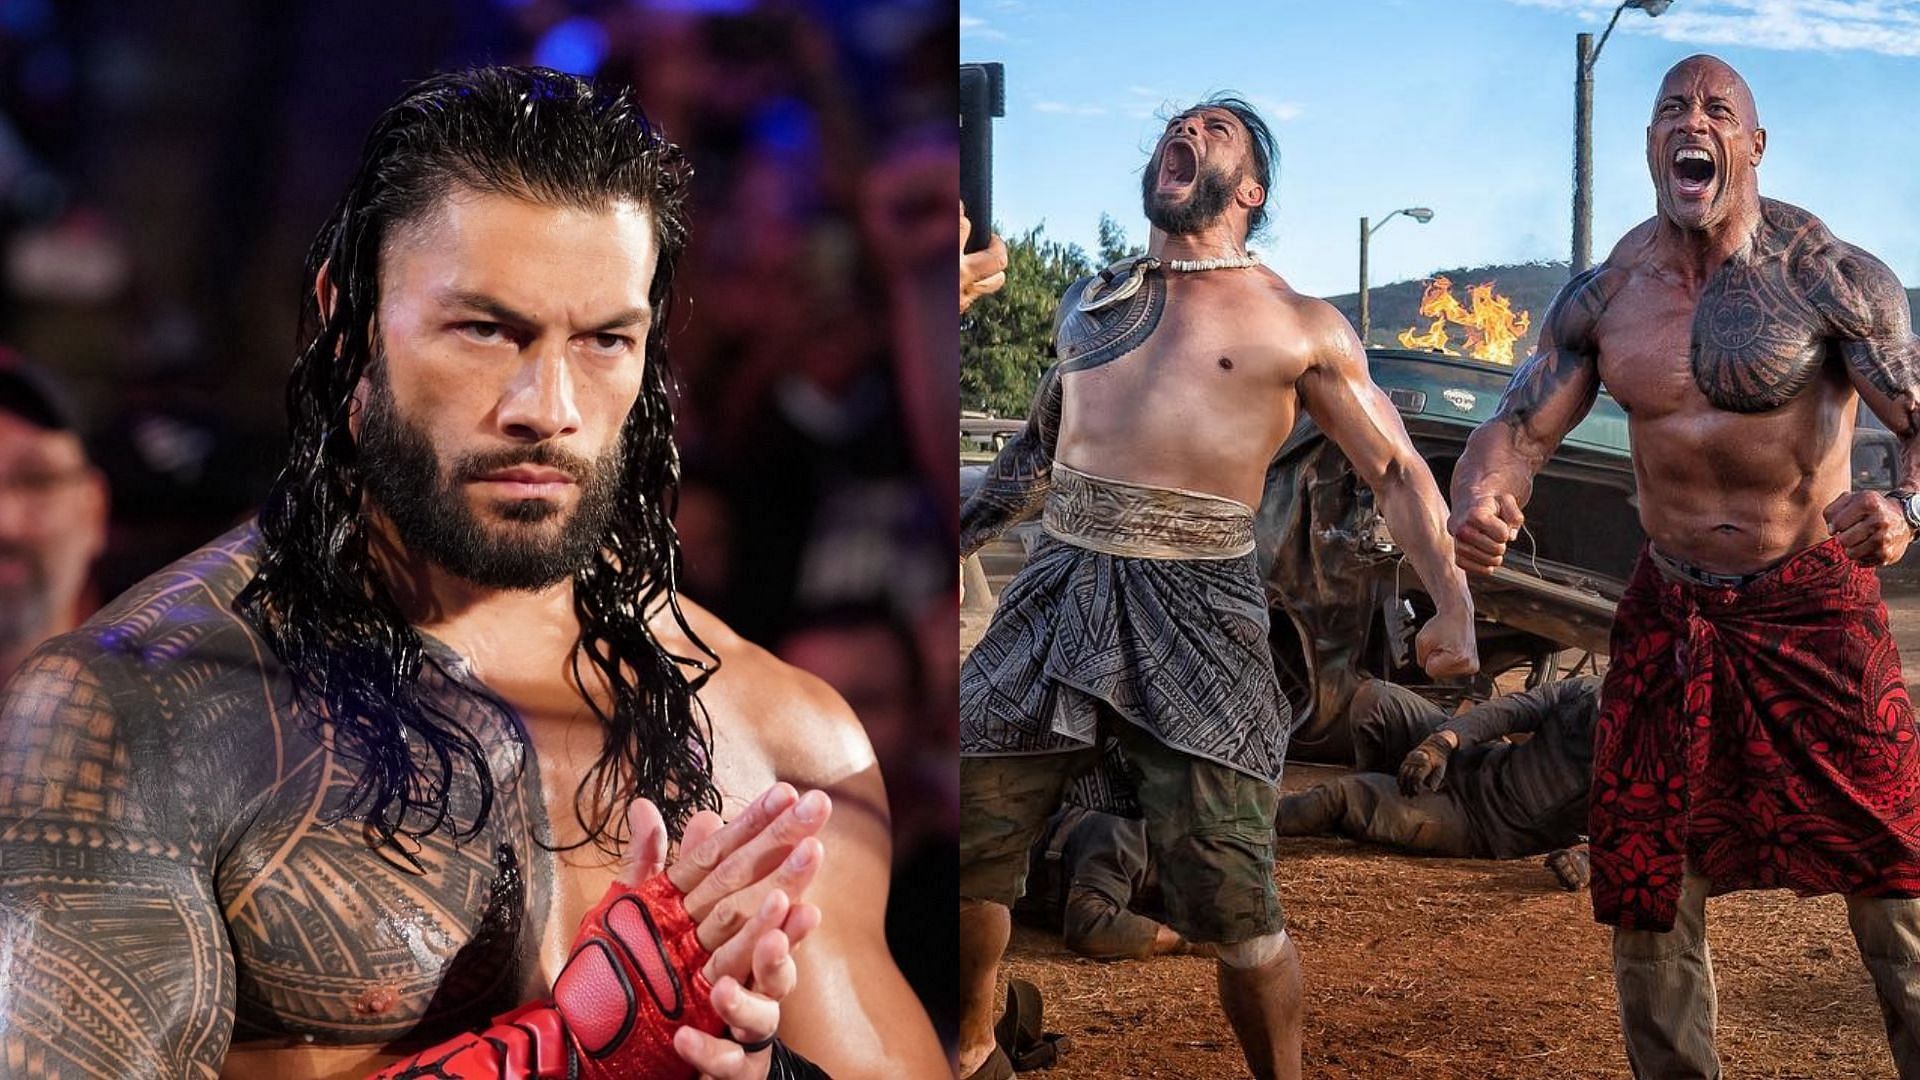 Roman Reigns was a part of Hobbs &amp; Shaw alongside The Rock